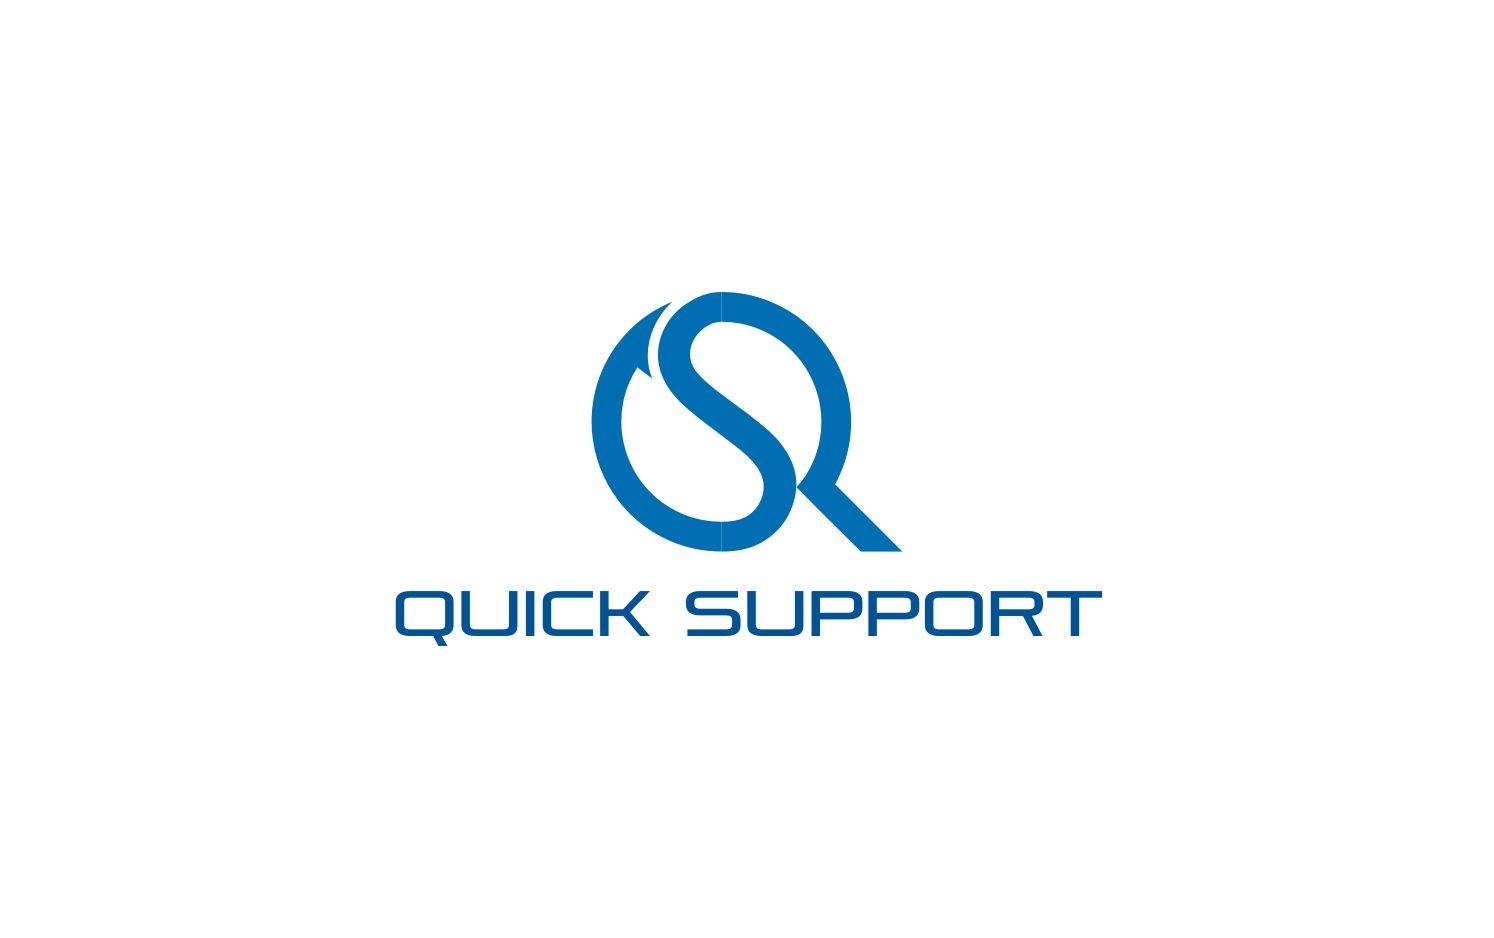 Colorful Computer Logo - Modern, Colorful, Computer Logo Design for Quick Support by kapelesi ...